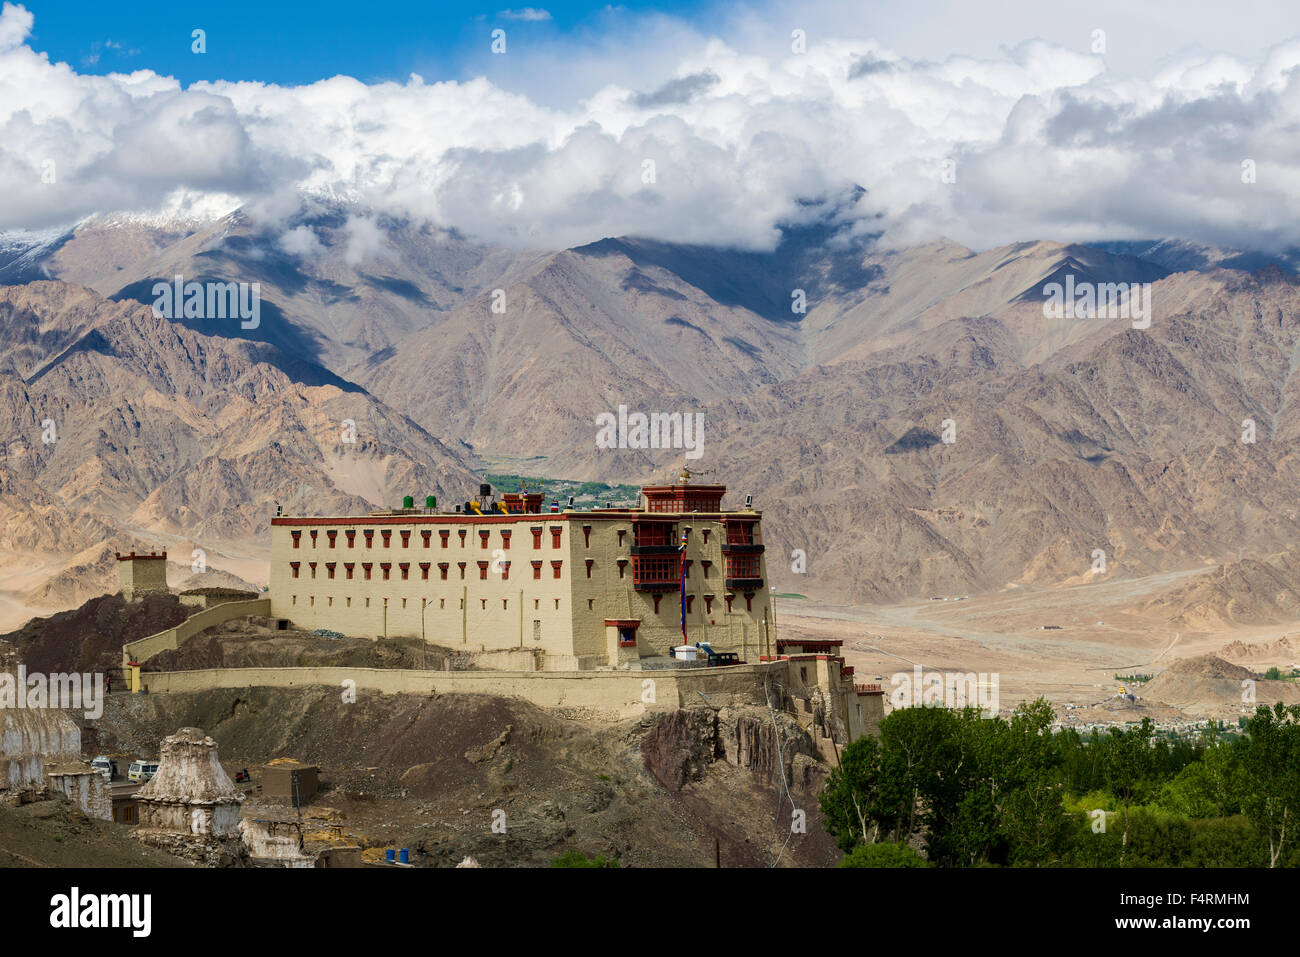 The Stock Palace is located on a hill above the Indus Valley, high mountains in the distance Stock Photo